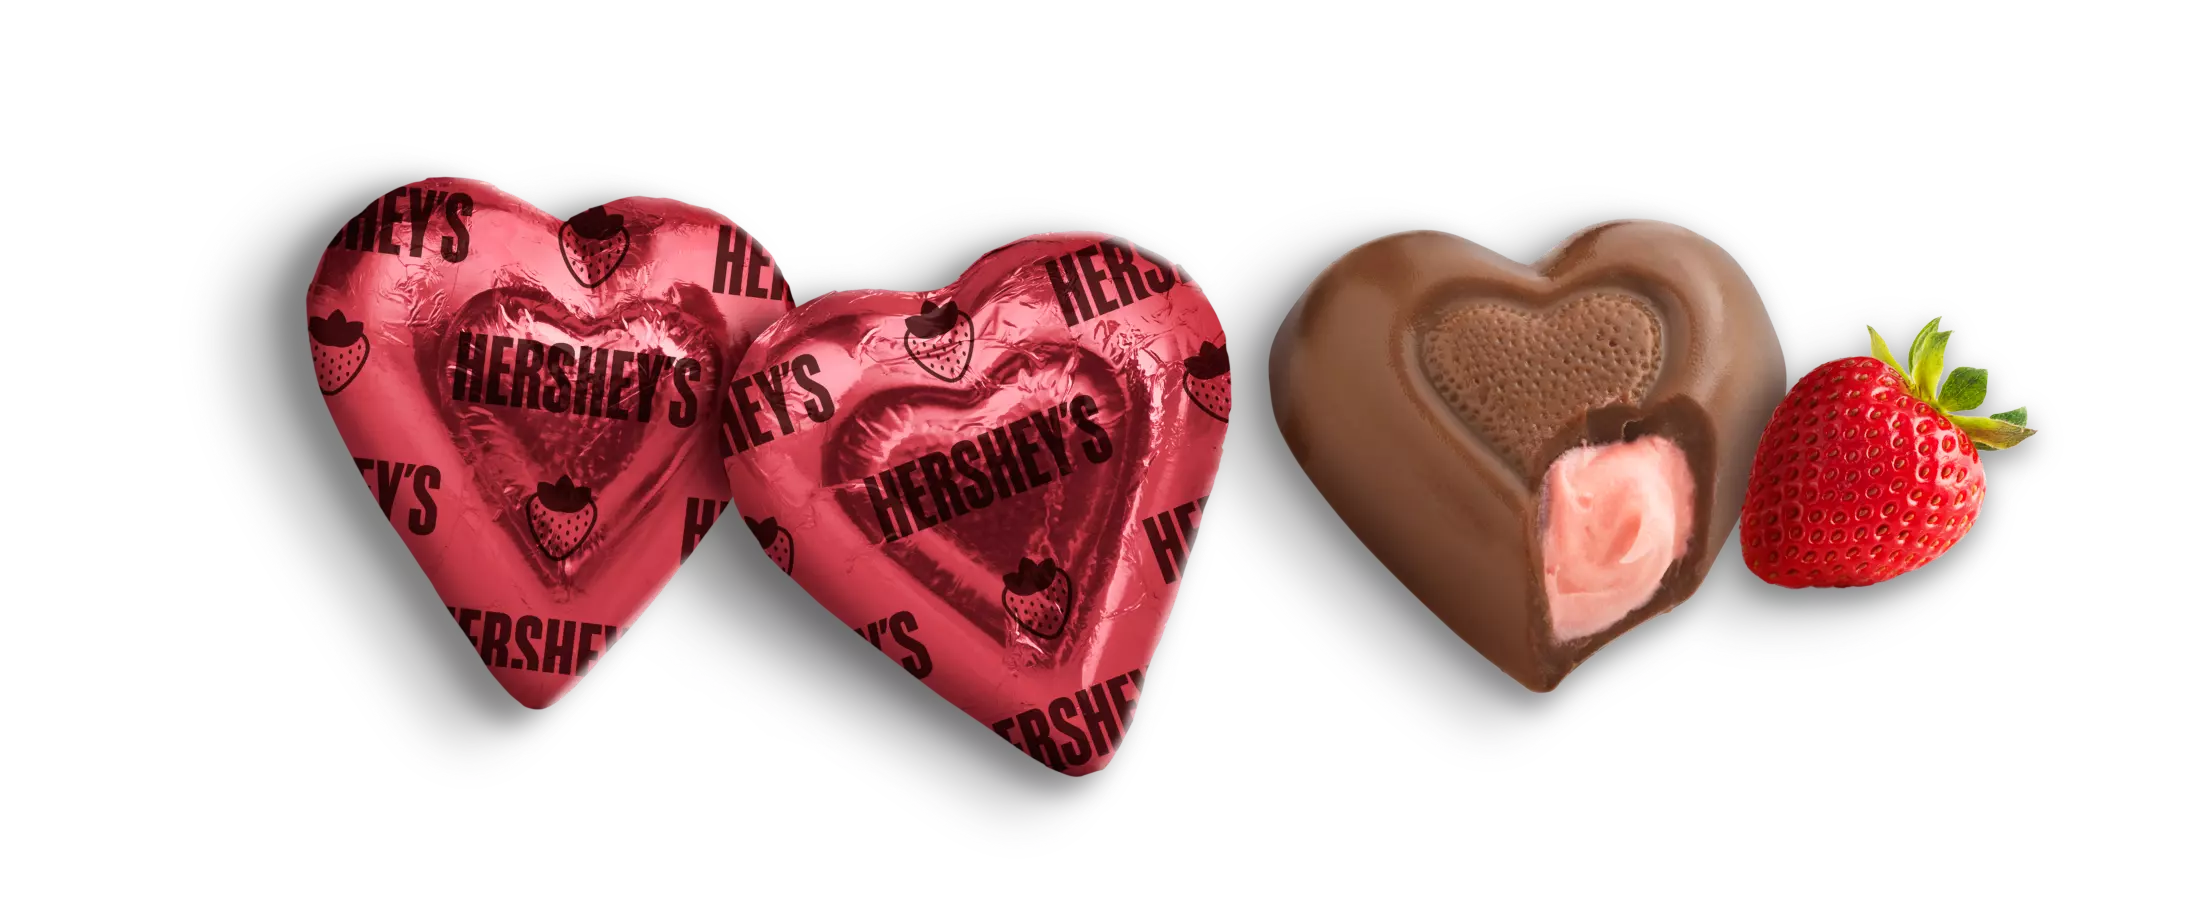 HERSHEY'S Milk Chocolate Strawberry Creme Hearts, 8.8 oz bag - Out of Package